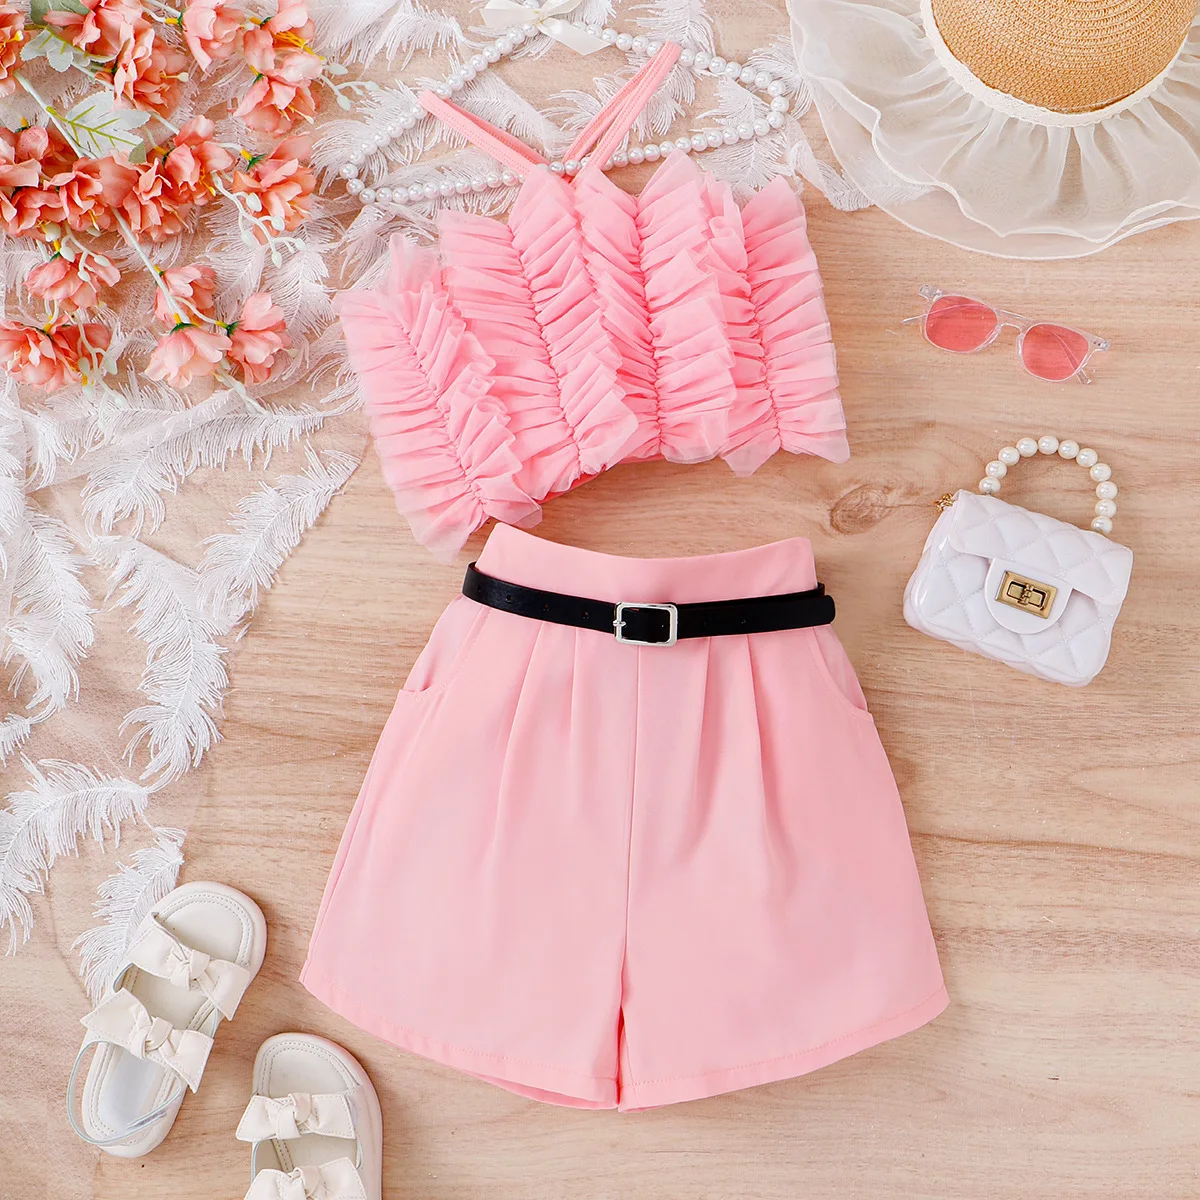 cute clothes for little girls